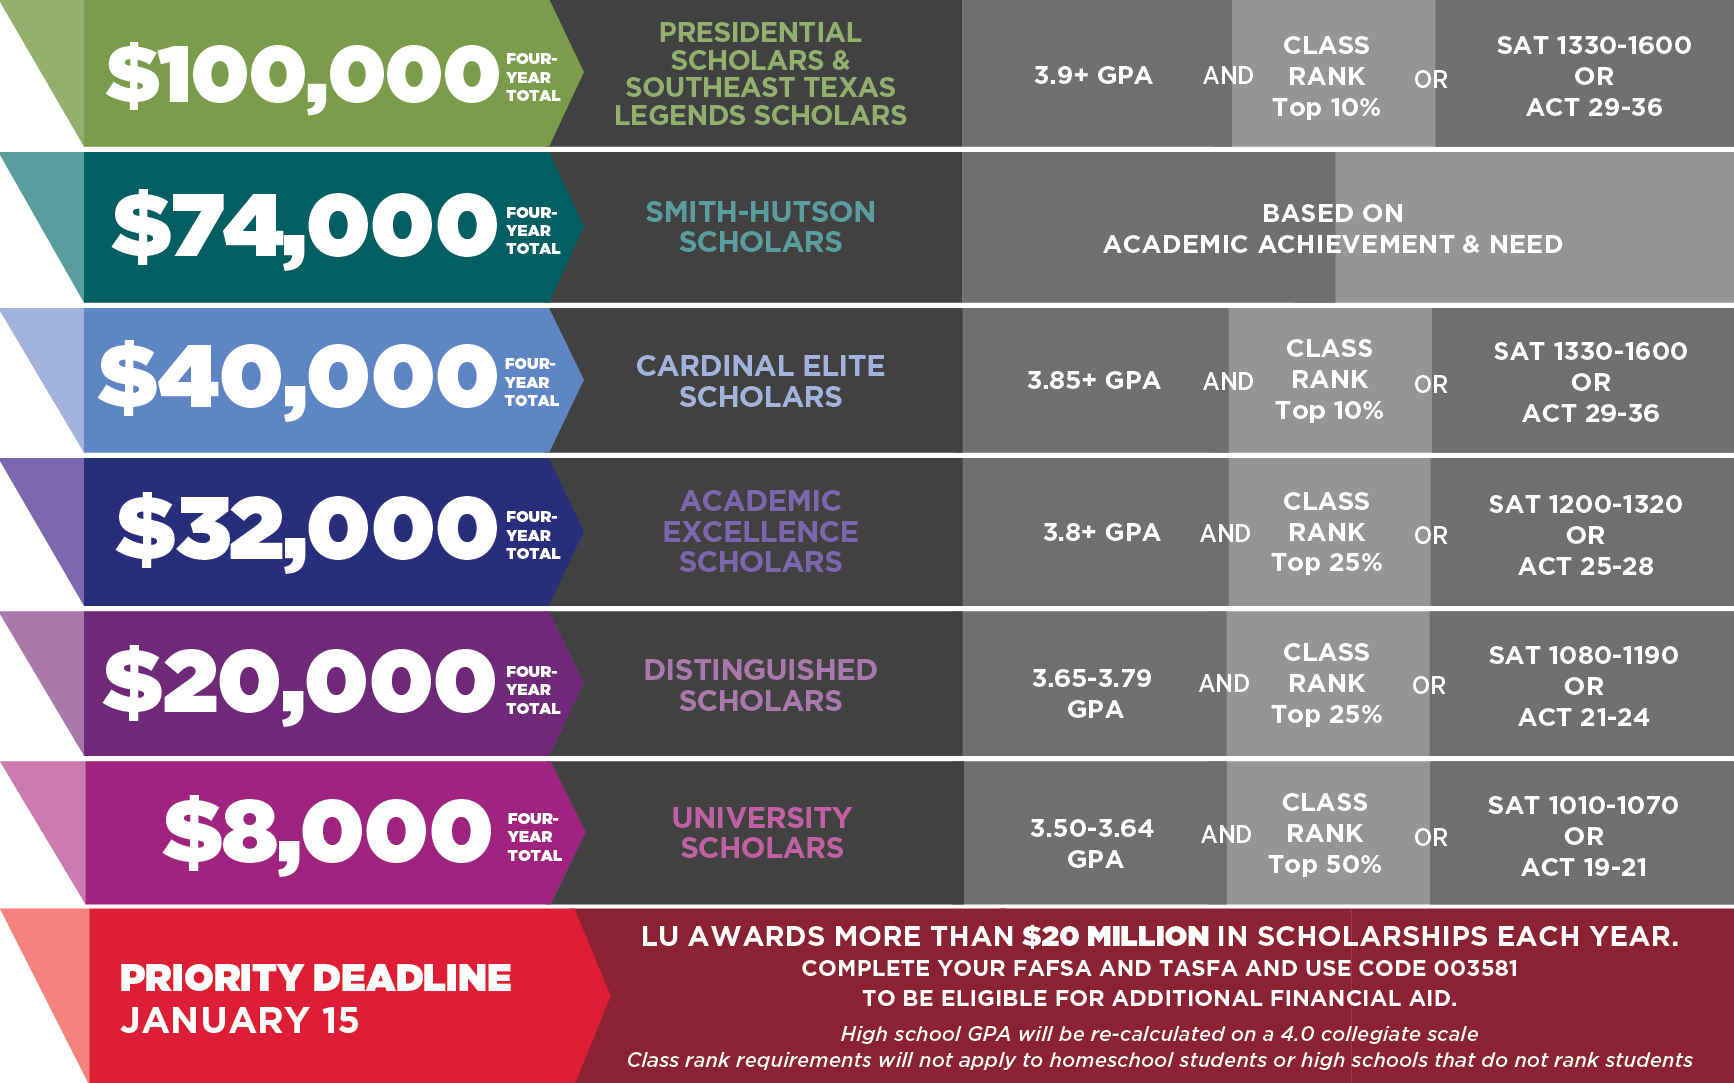 scholarship amounts and criteria listed on a multicolored table.  Text version below image.